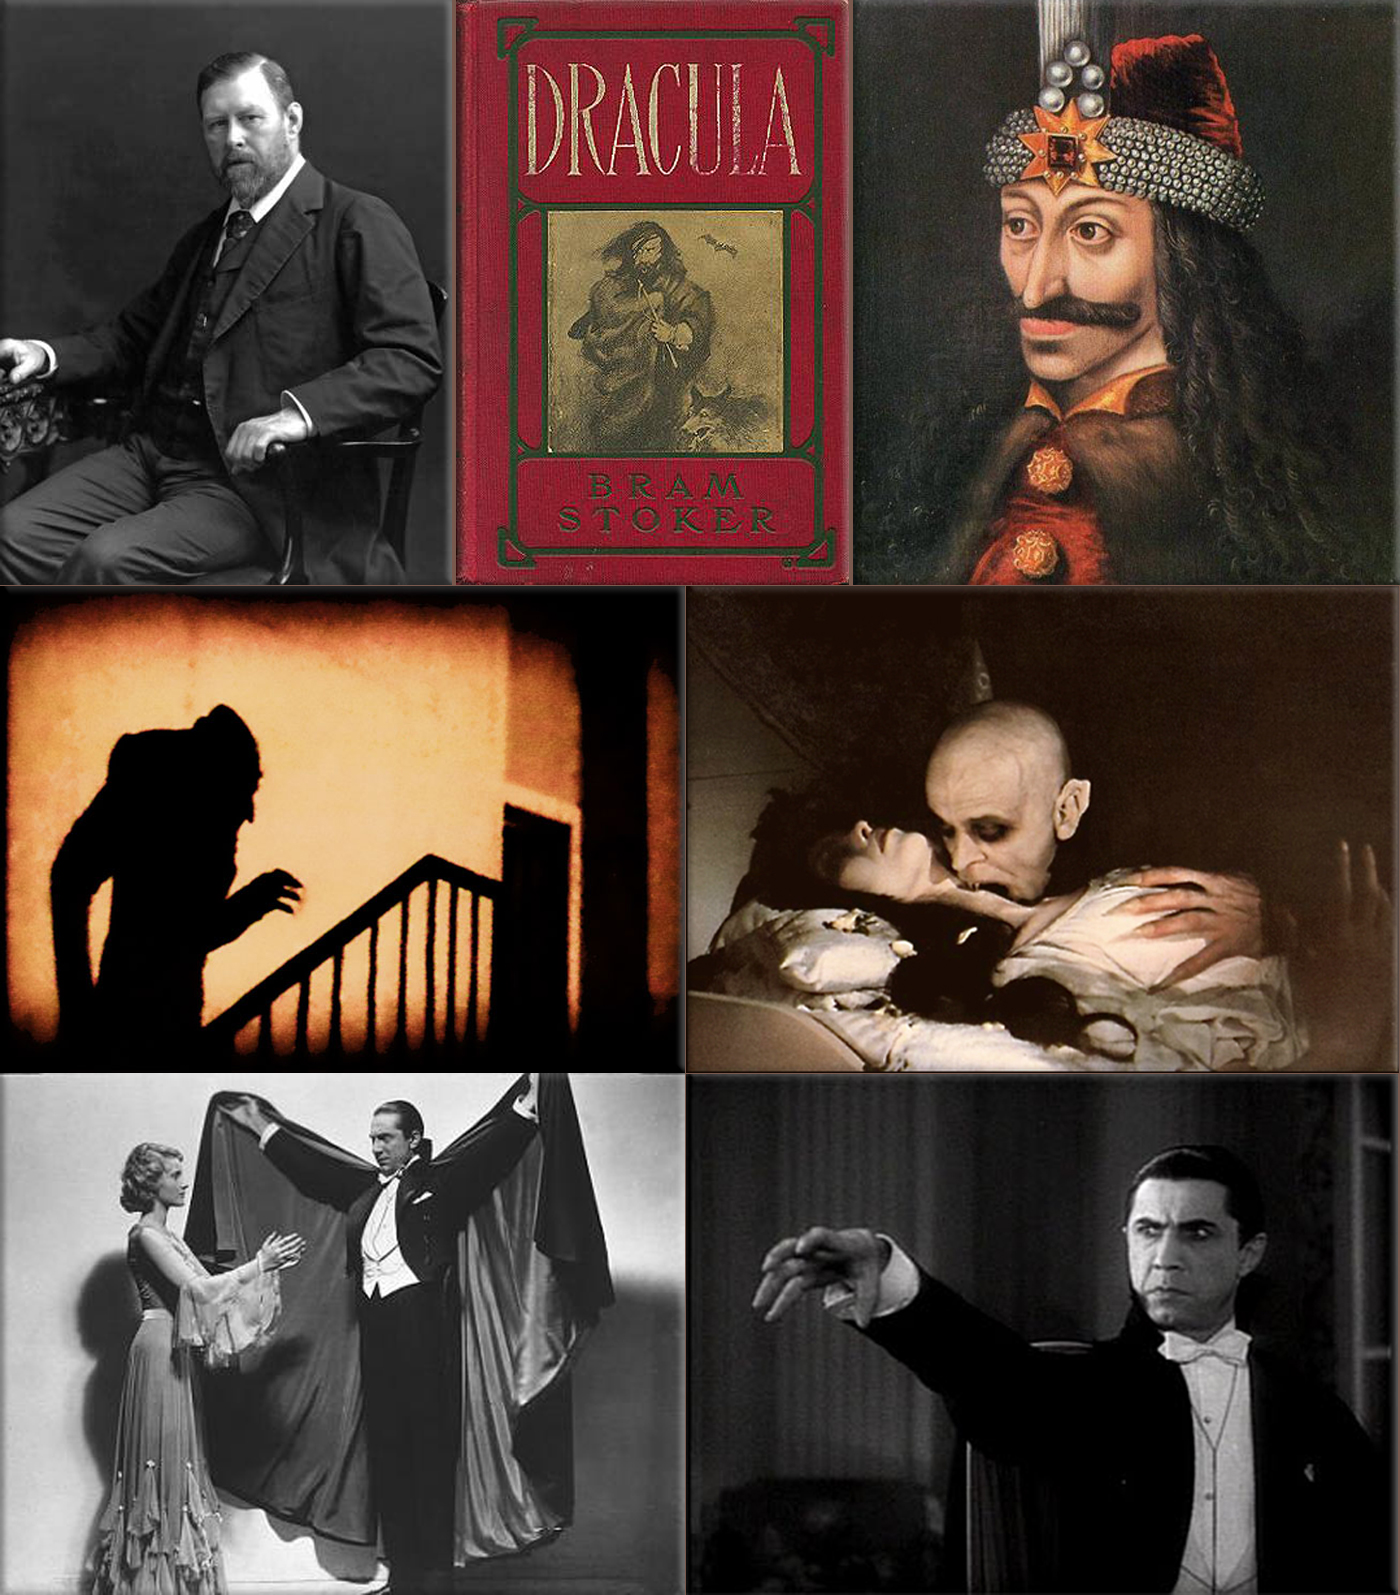 Dracula, a novel by Irish author Bram Stoker is published on May 26th, 1897.